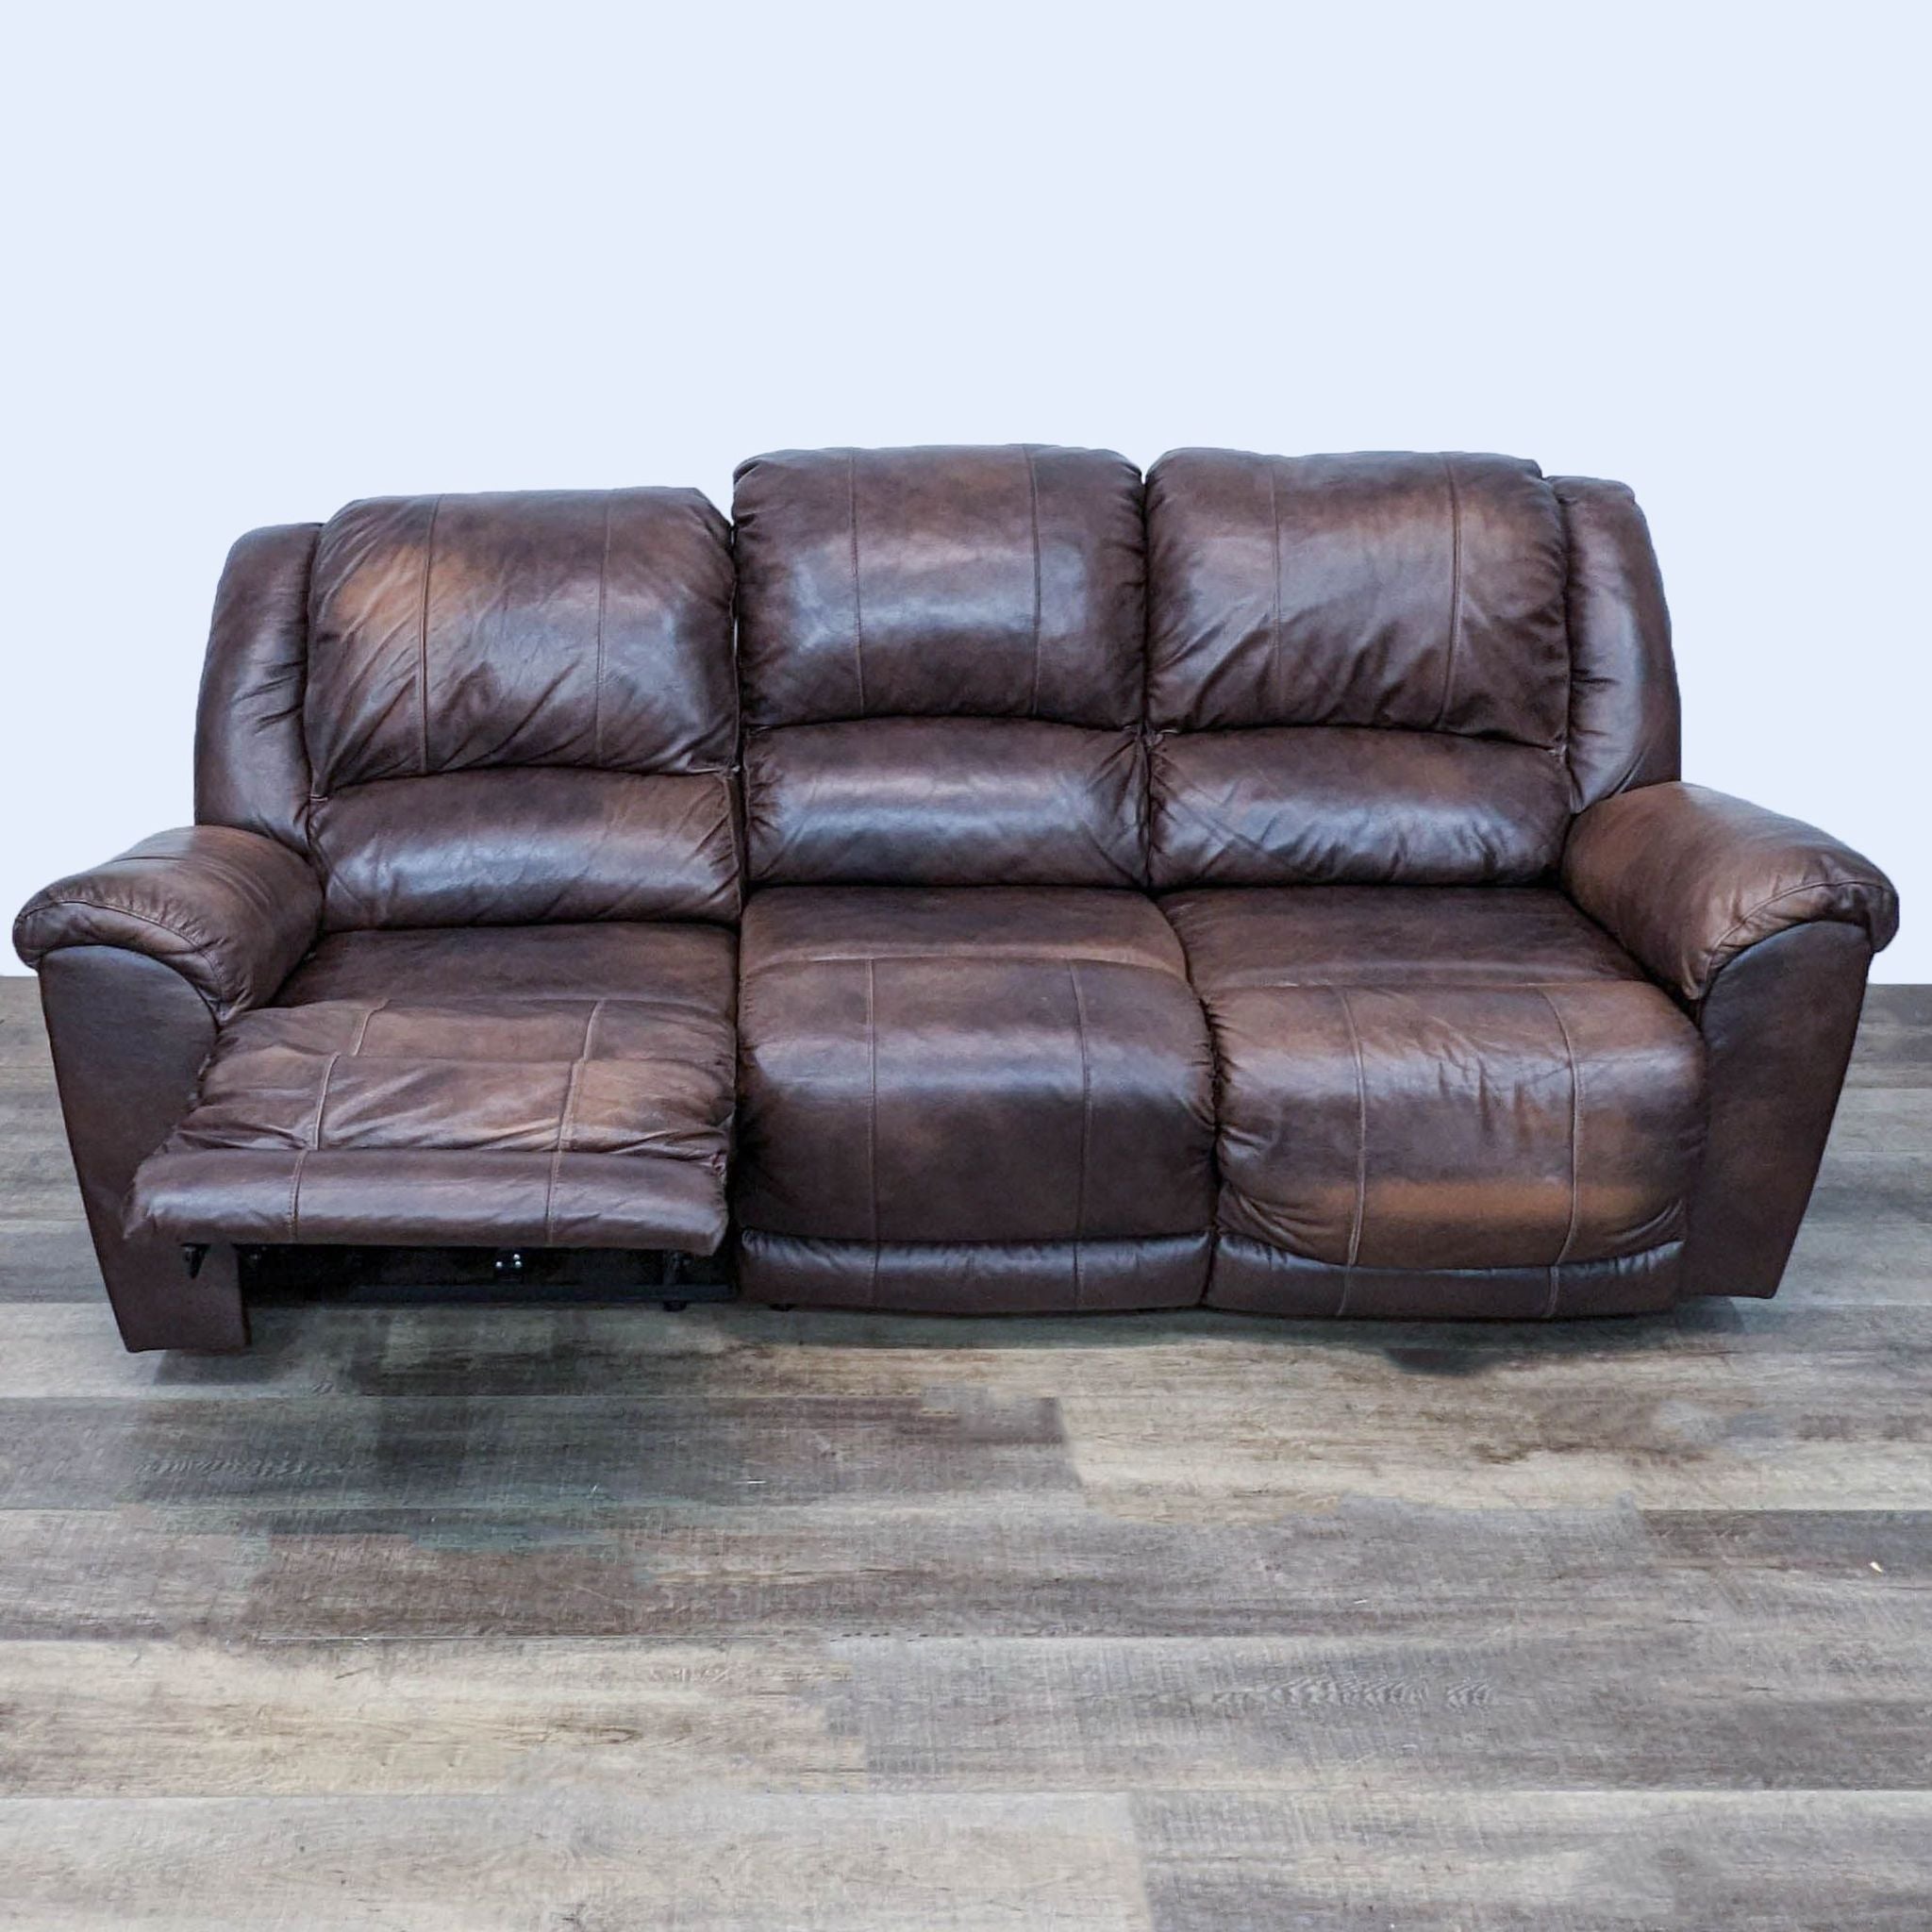 Ashley Furniture brown leather reclining sofa with pillow top arms, shown closed.